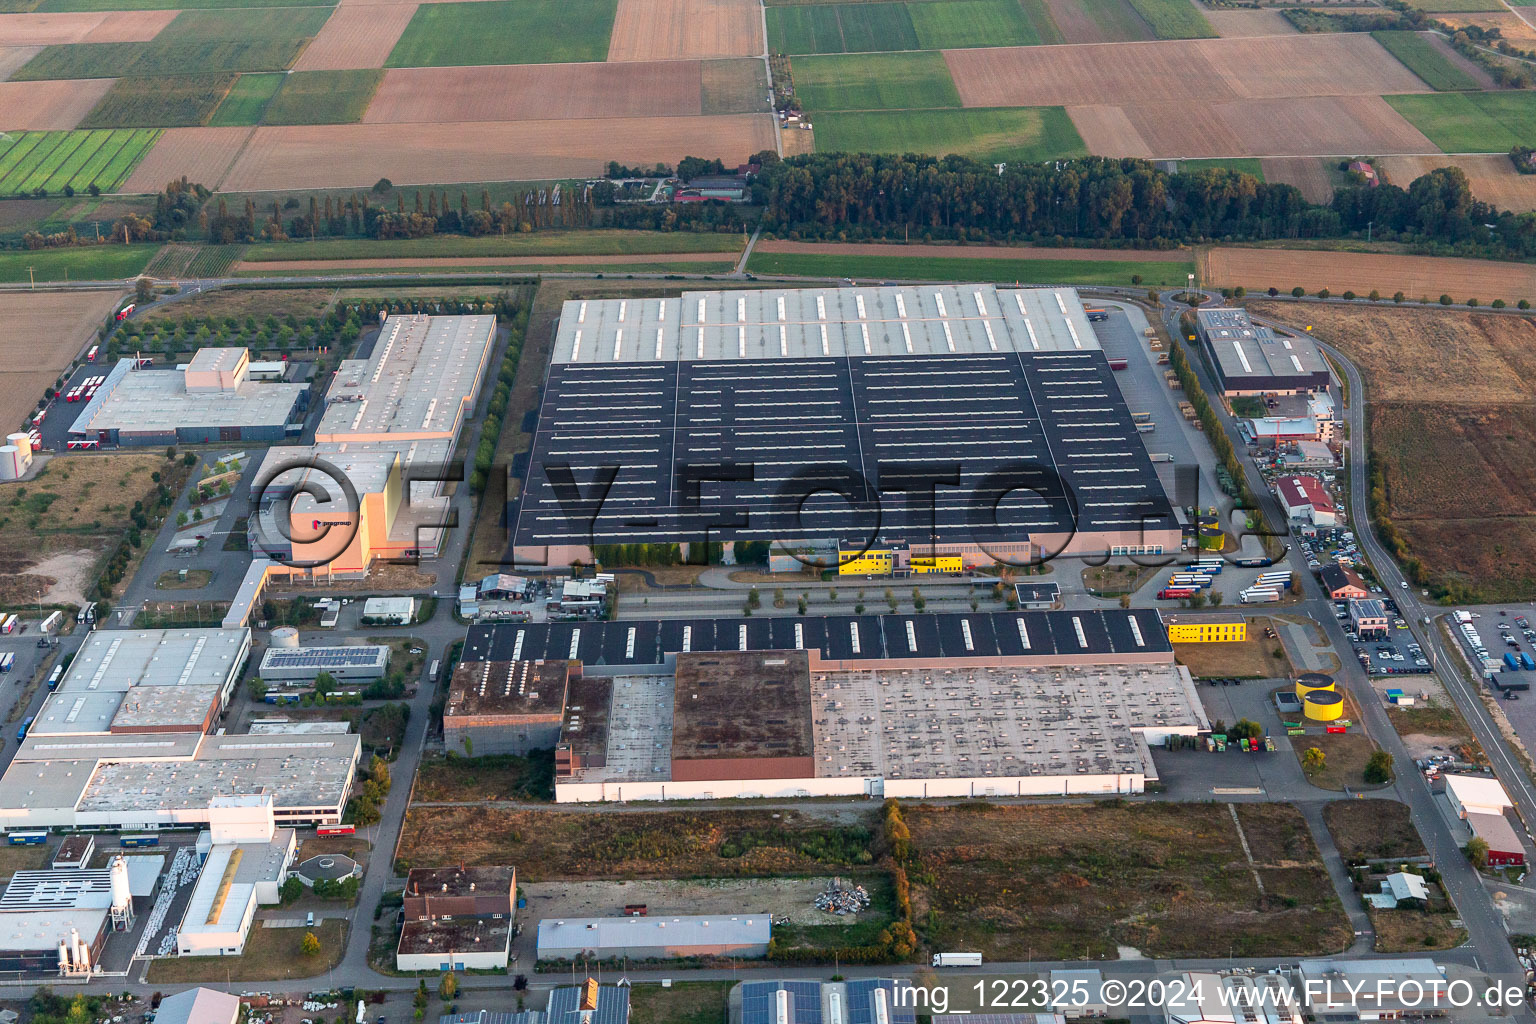 Mercedes Benz/Daimler logistics center in Offenbach an der Queich in the state Rhineland-Palatinate, Germany